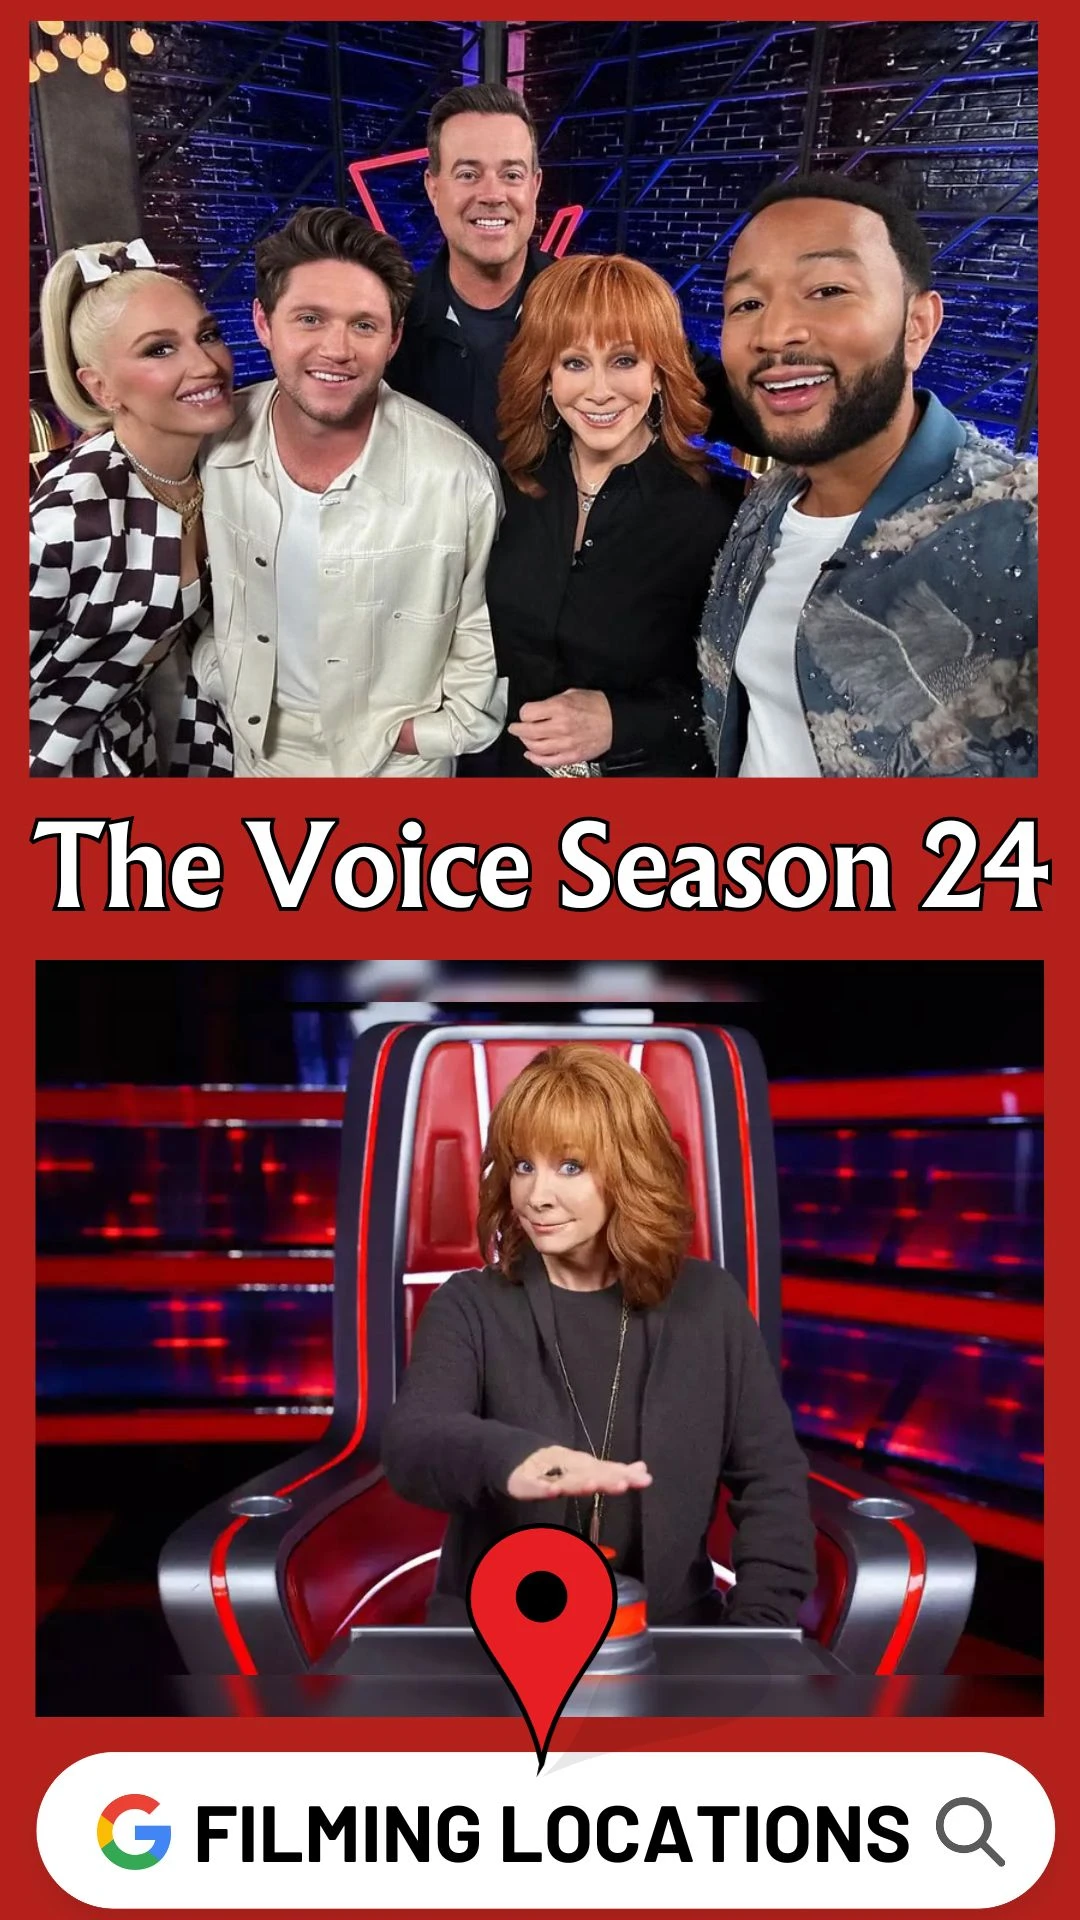 The Voice Filming Locations Season 24